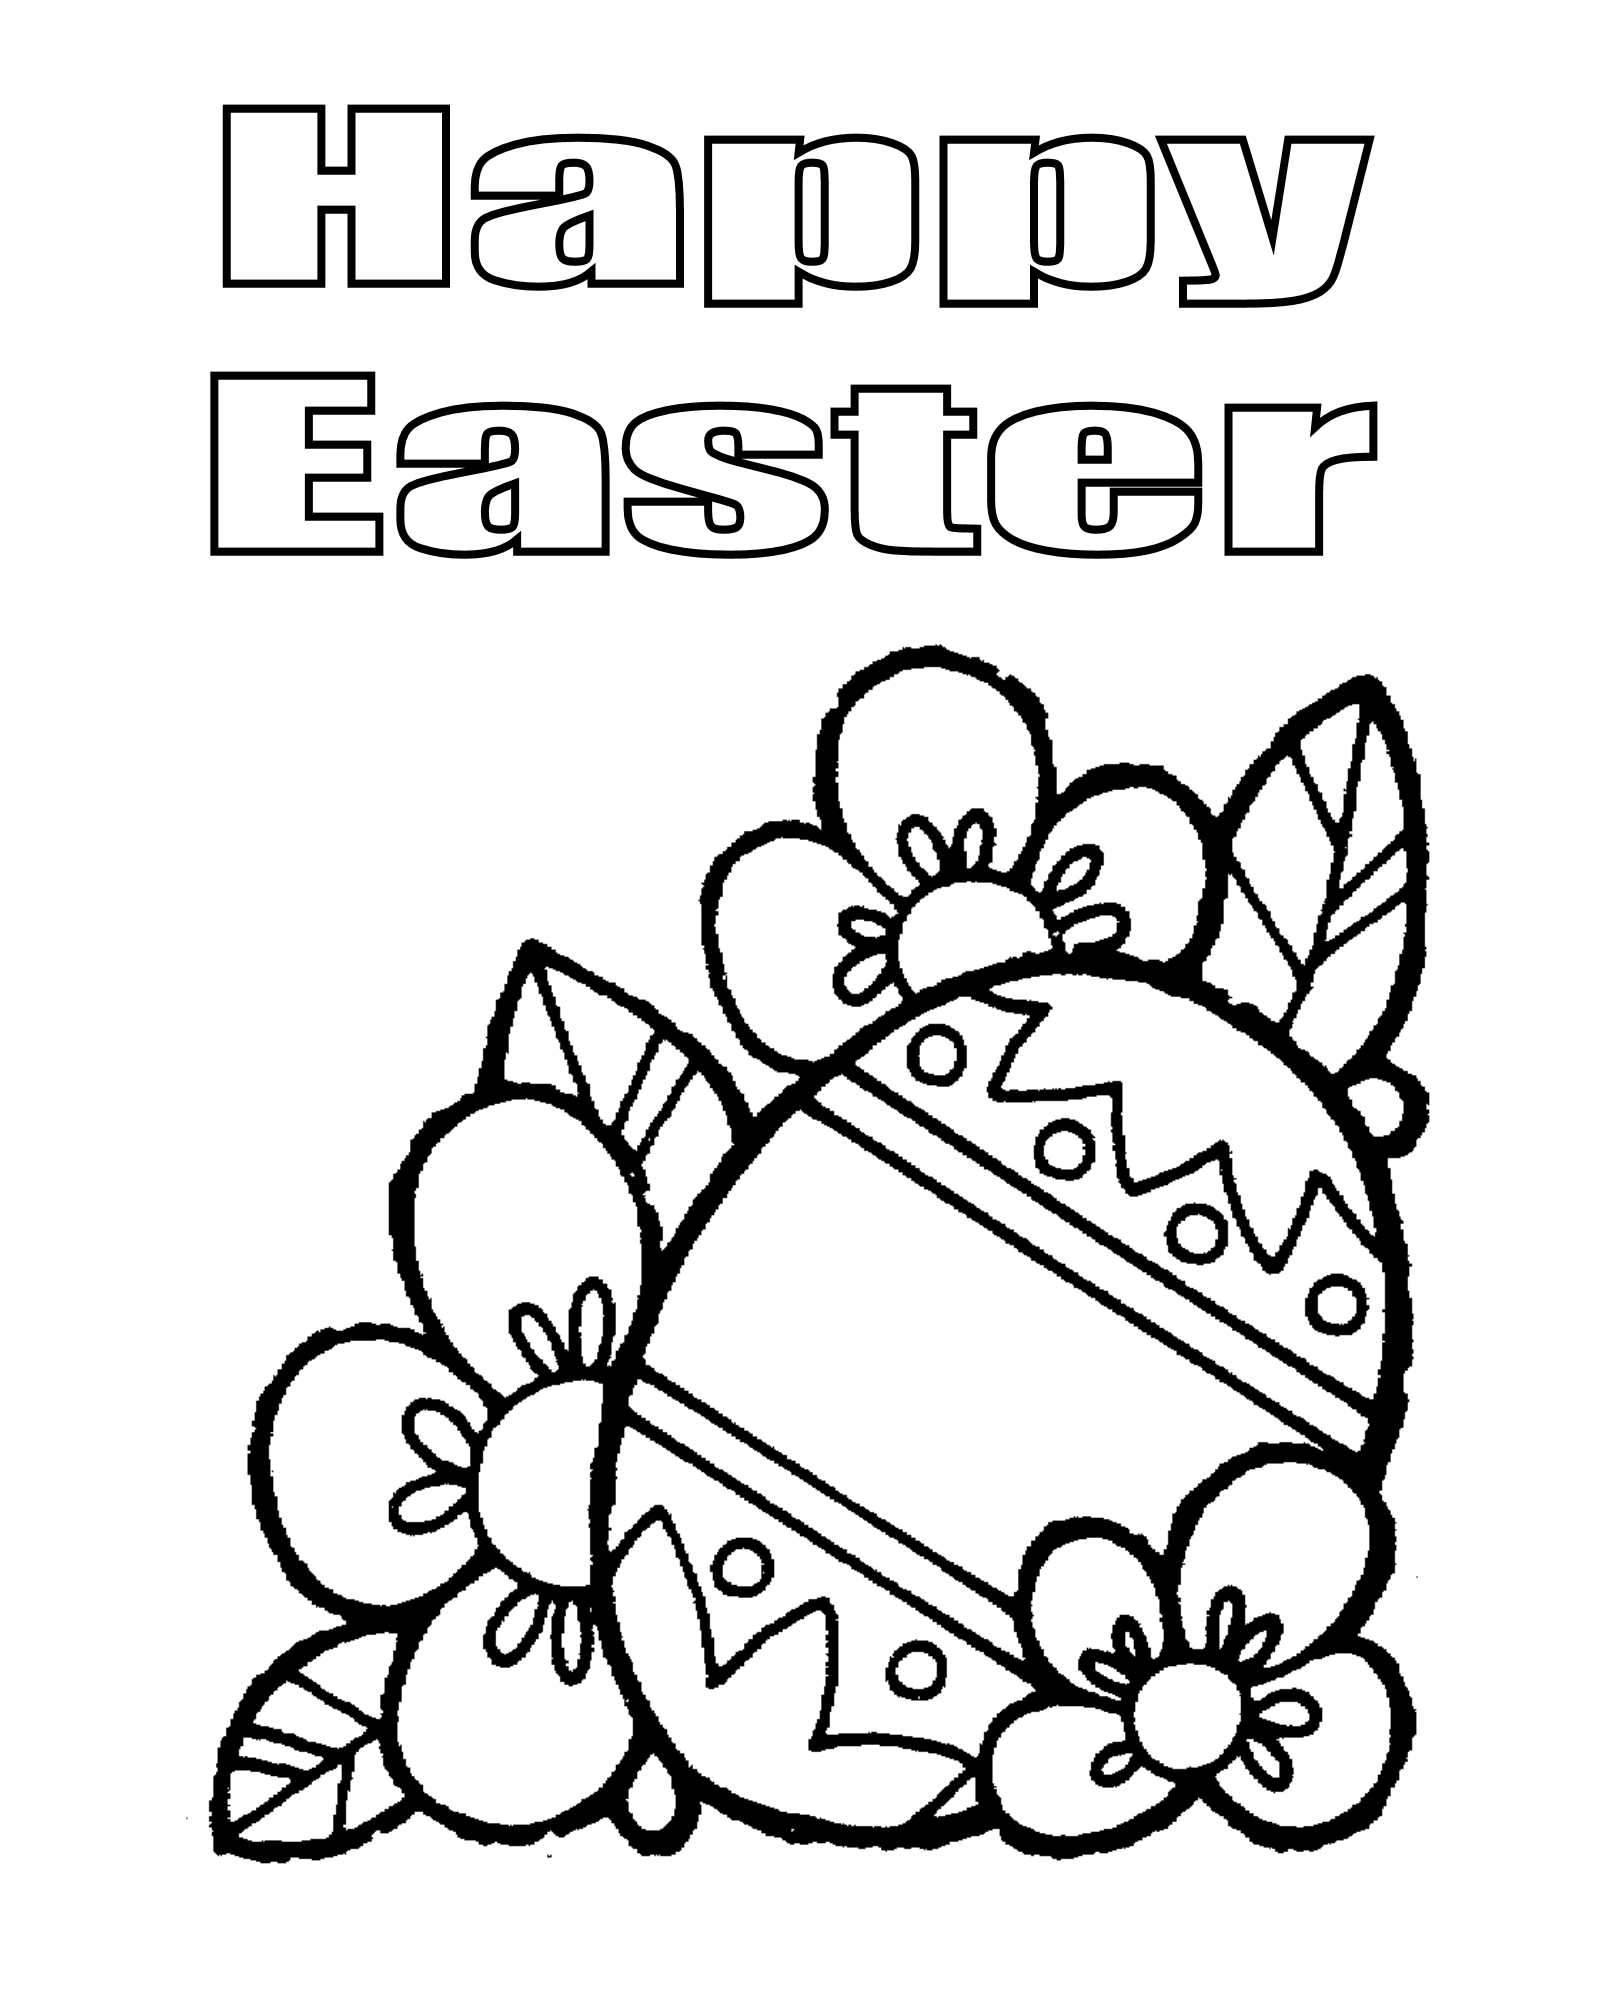 intricate-easter-egg-coloring-page-free-printable-coloring-pages